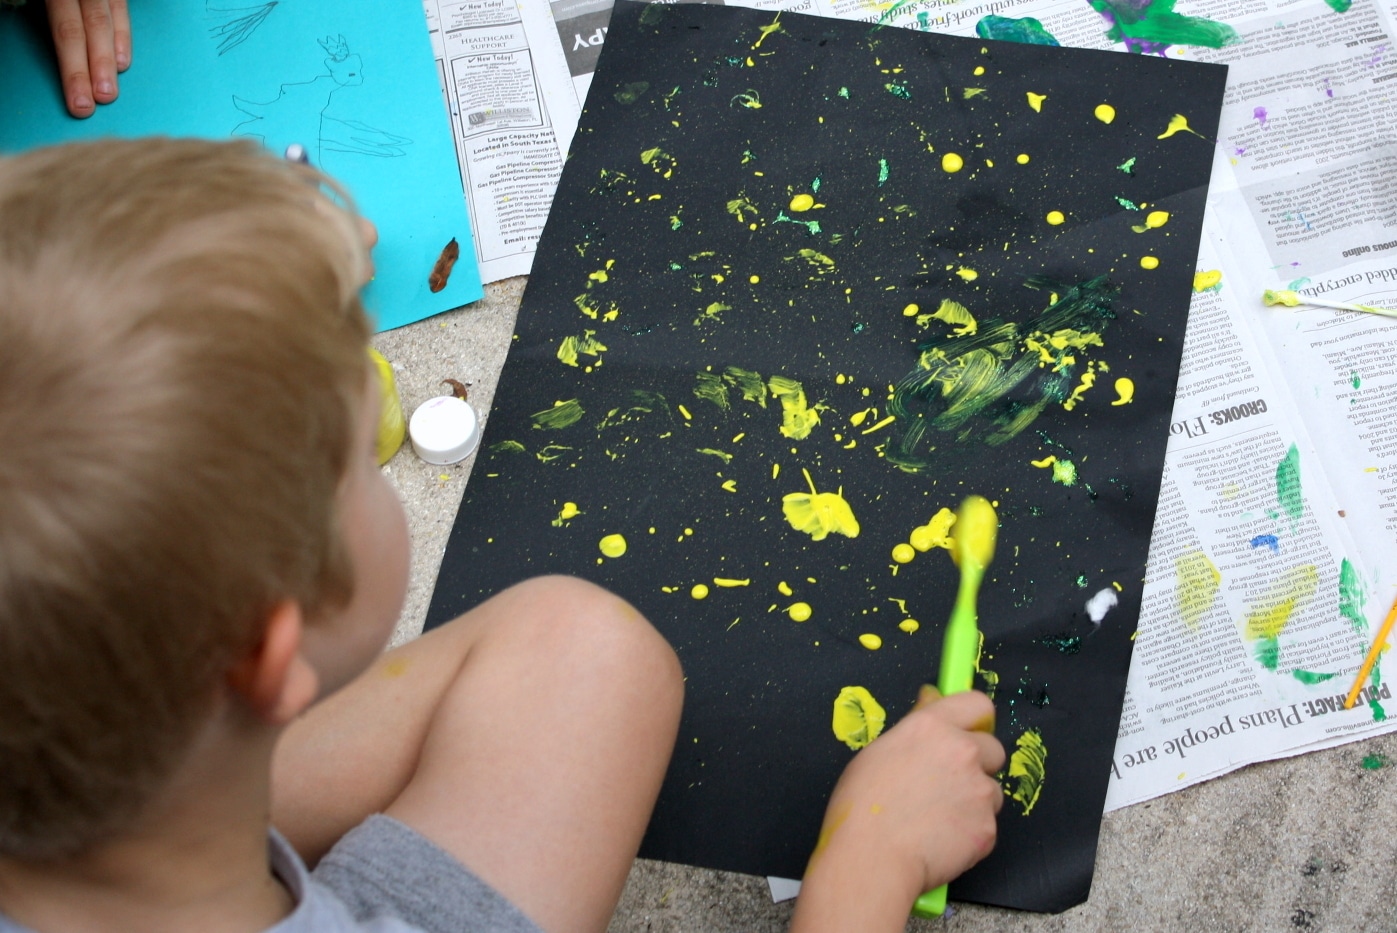 Painting the stars in the nighttime sky